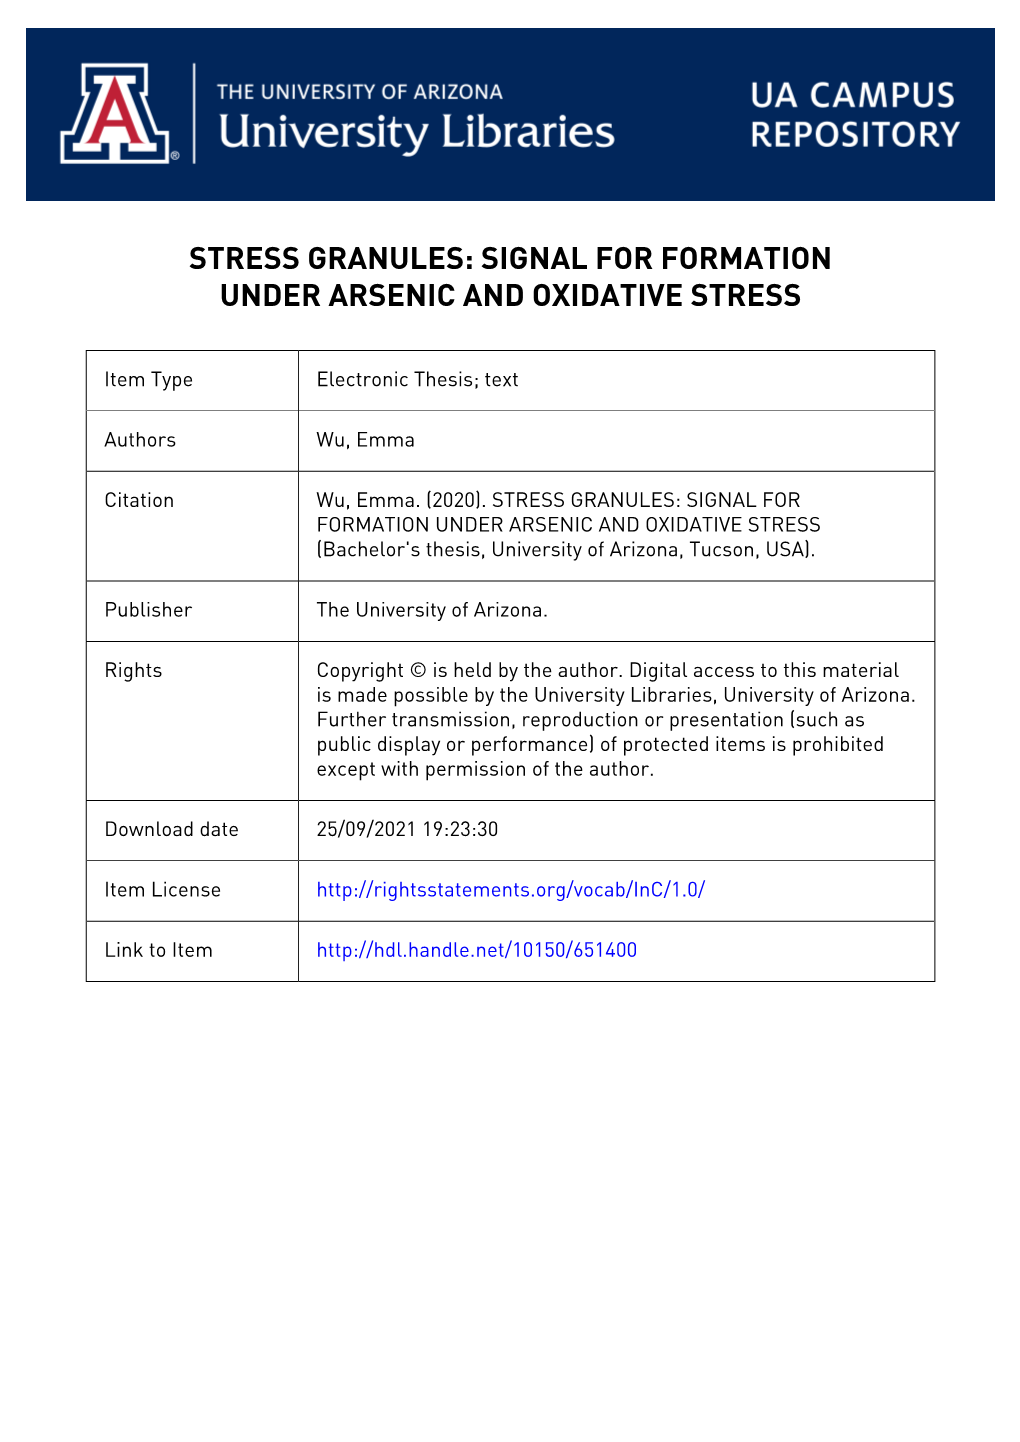 Stress Granules: Signal for Formation Under Arsenic and Oxidative Stress